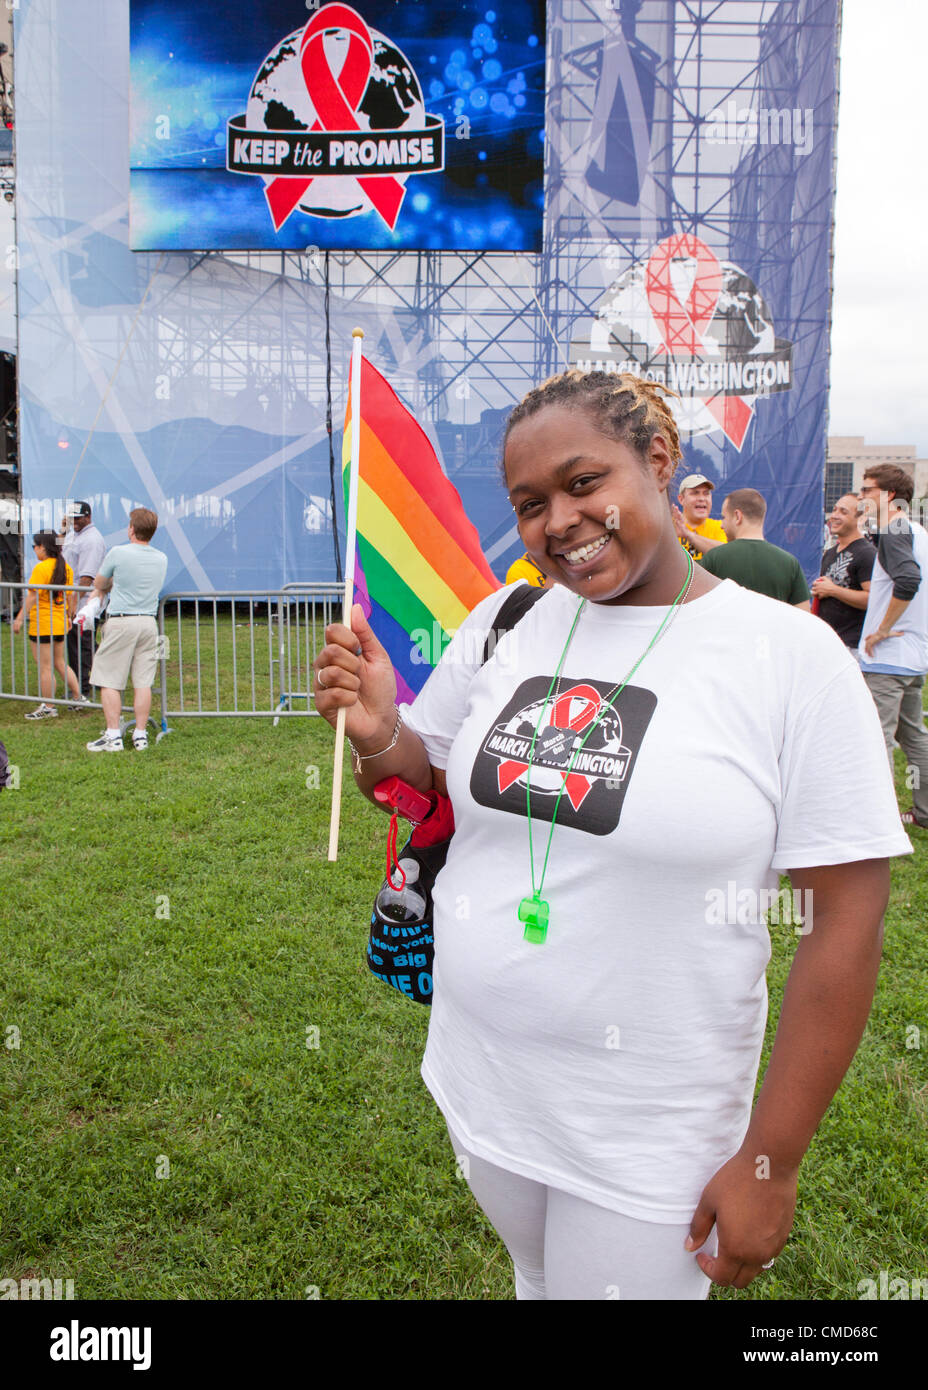 A woman holds up a rainbow flag before the AIDS march - July 22, 2012, Washington, DC USA Stock Photo